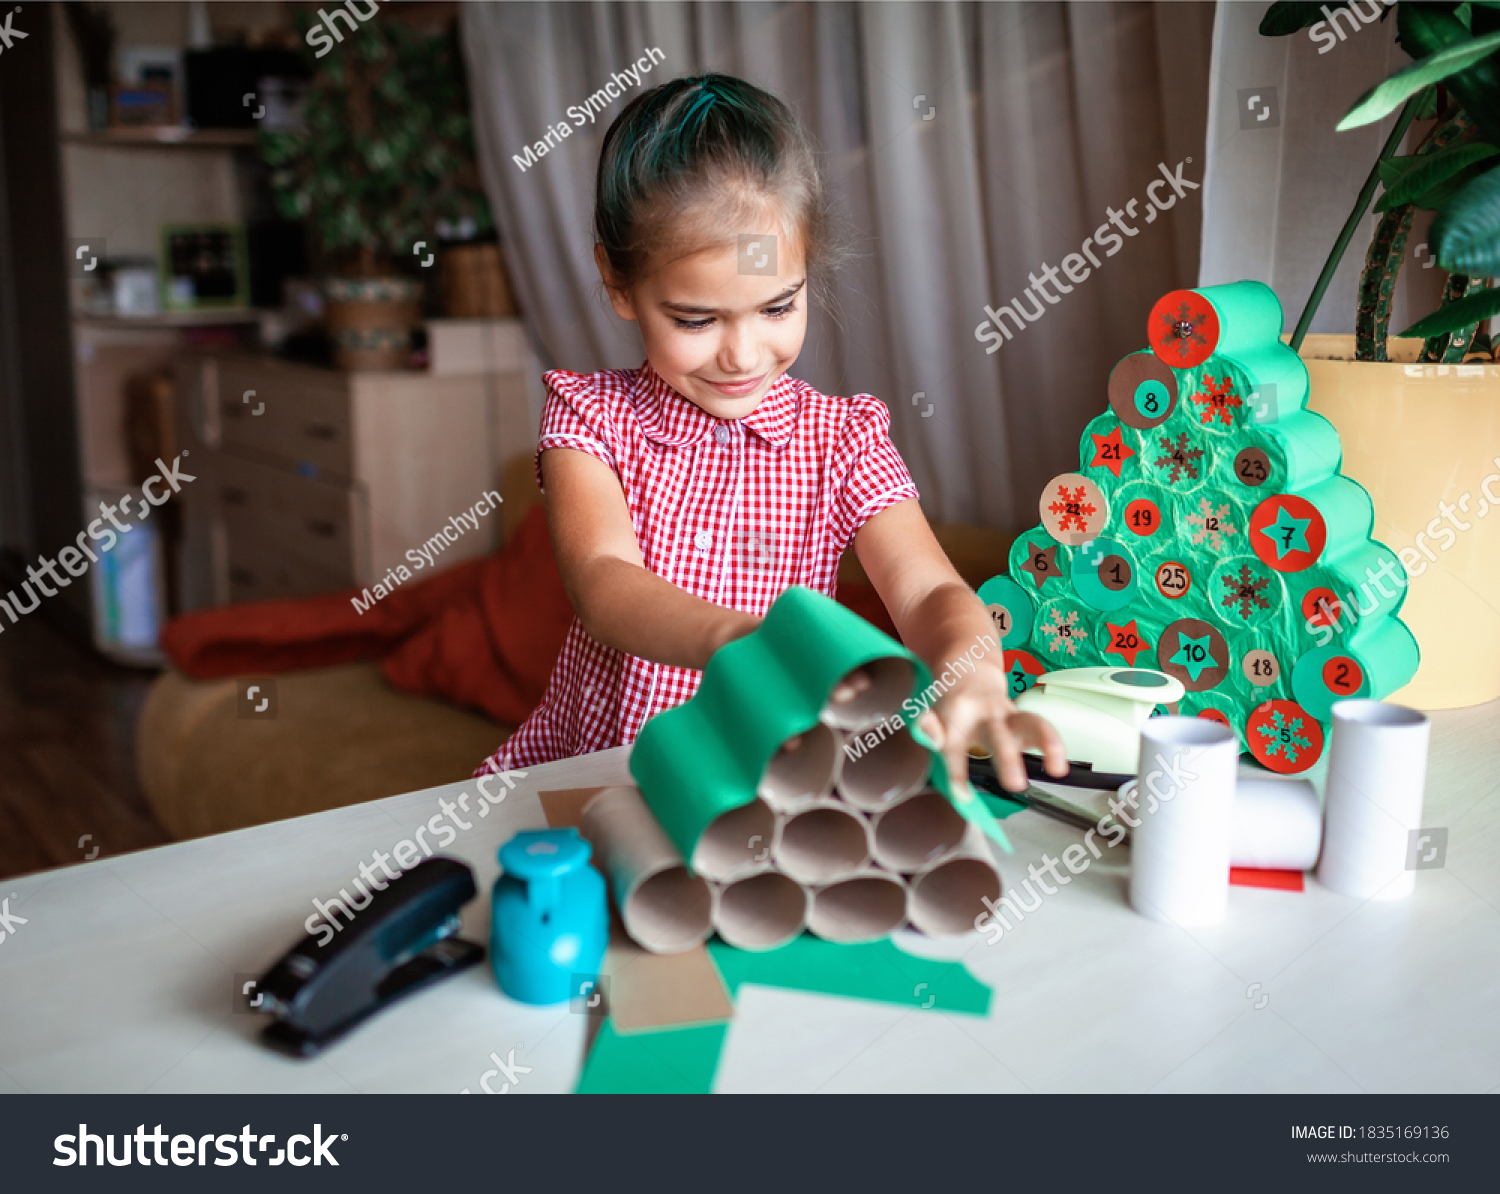 Cute little kids making handmade advent calendar with toilet paper rolls at home. Glue, colored paper, cut punch to hide sweets and candies in rolls. Seasonal activity for kids, zero waste holidays #1835169136